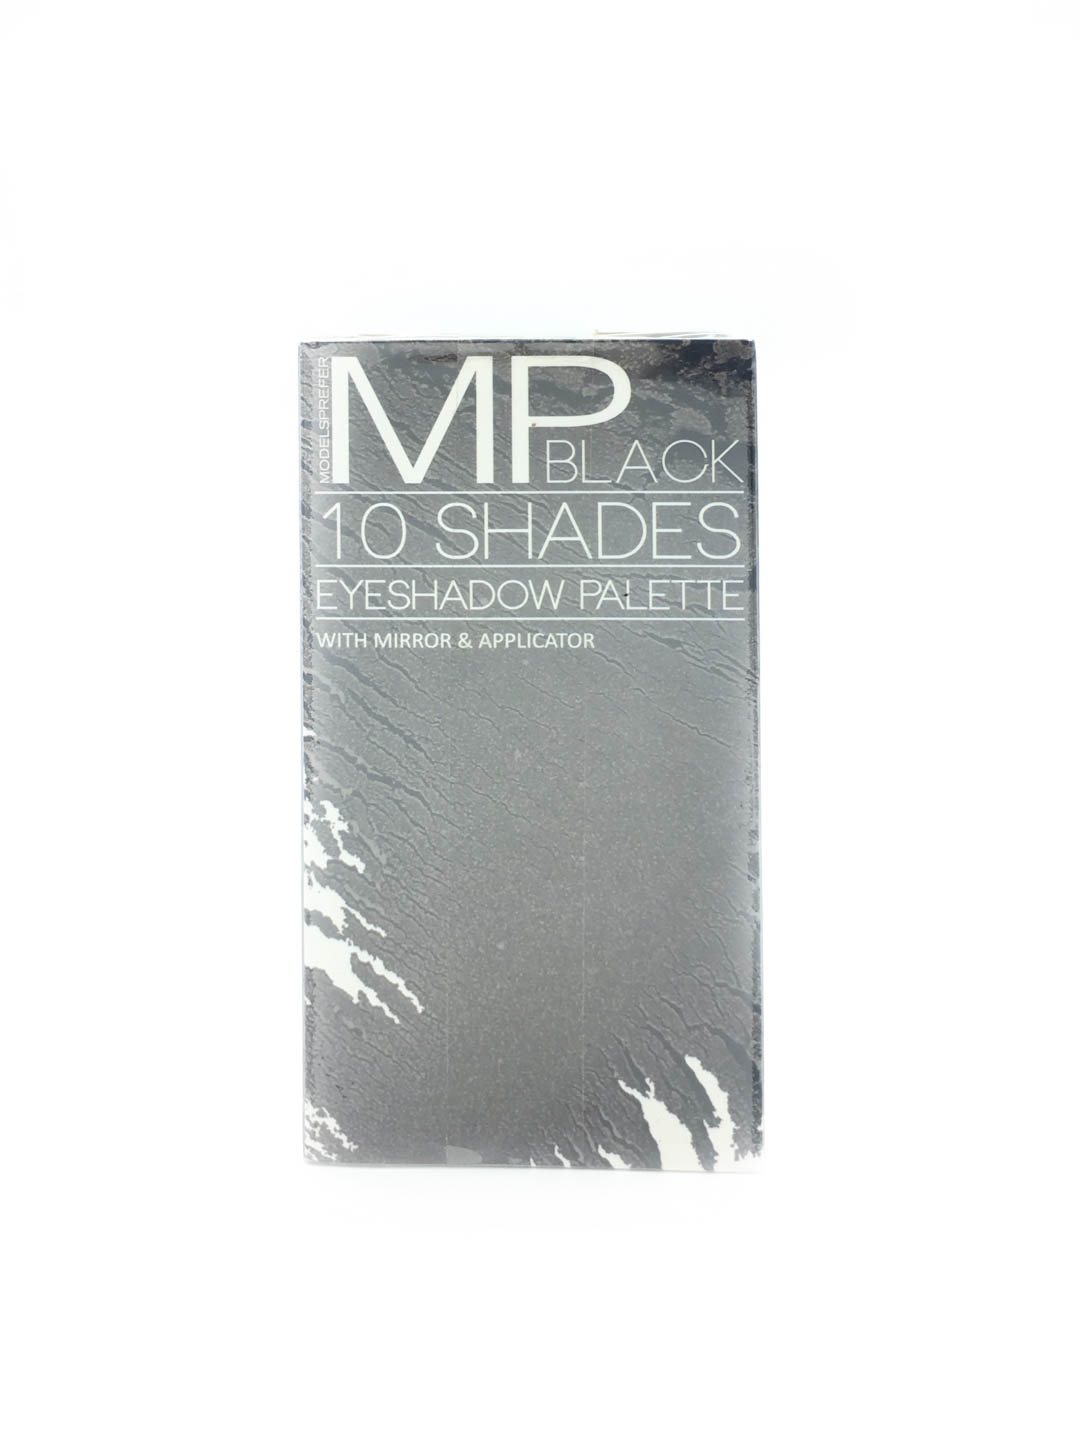 Models Prefer MP Black 10 Shade Eyeshadow with Mirror & Applicator Sets and Palette